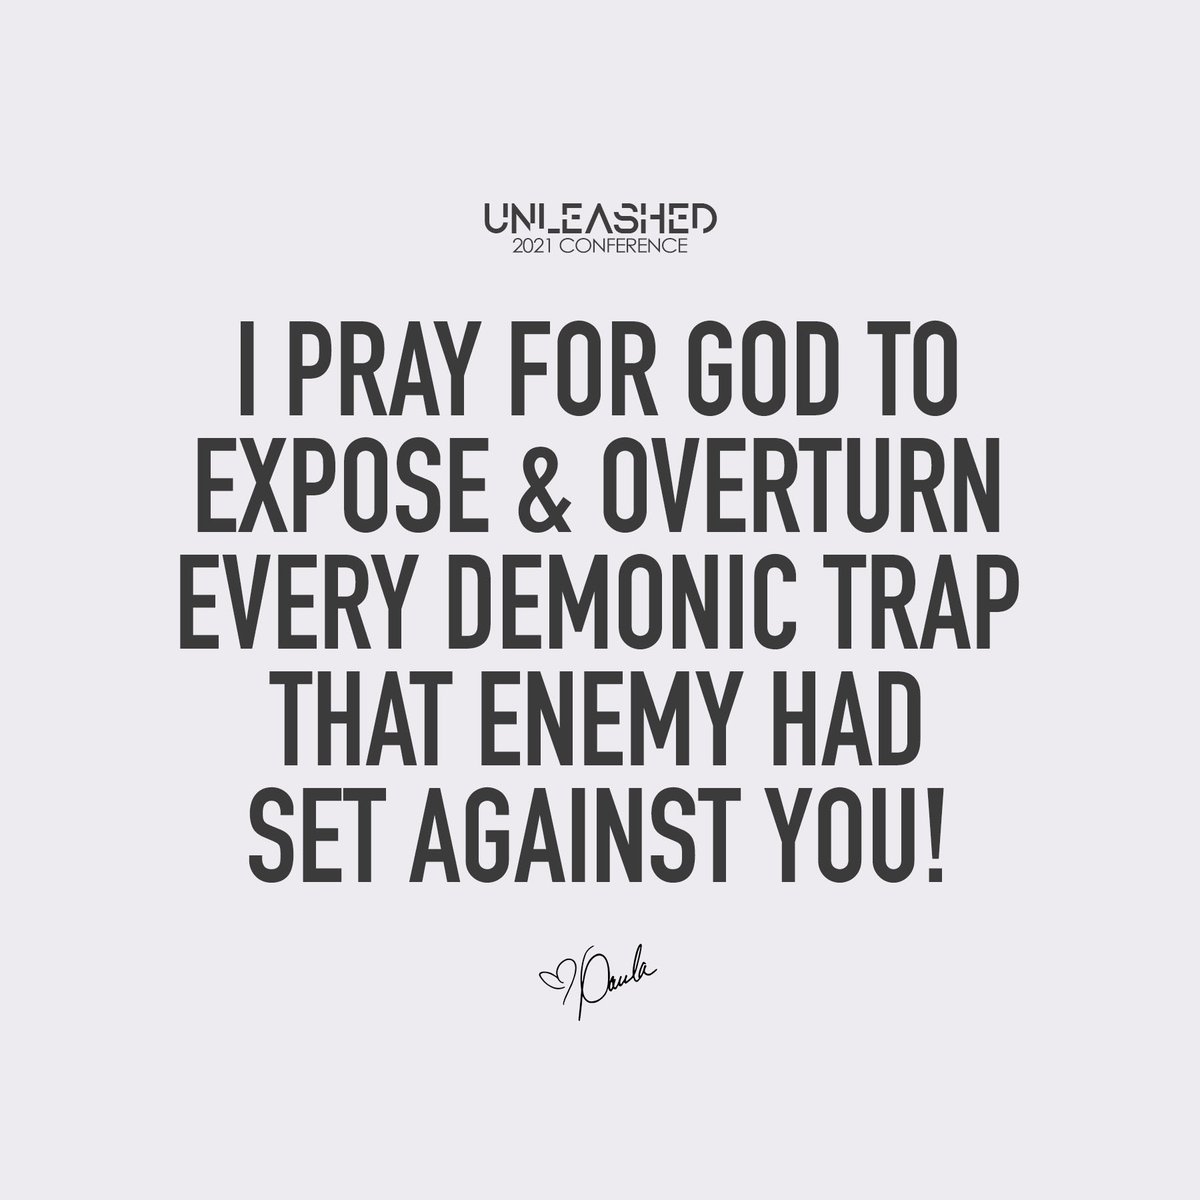 I pray for God to expose & overturn every demonic trap that enemy had set against you. You are about to be UNLEASHED into your purpose and destiny!